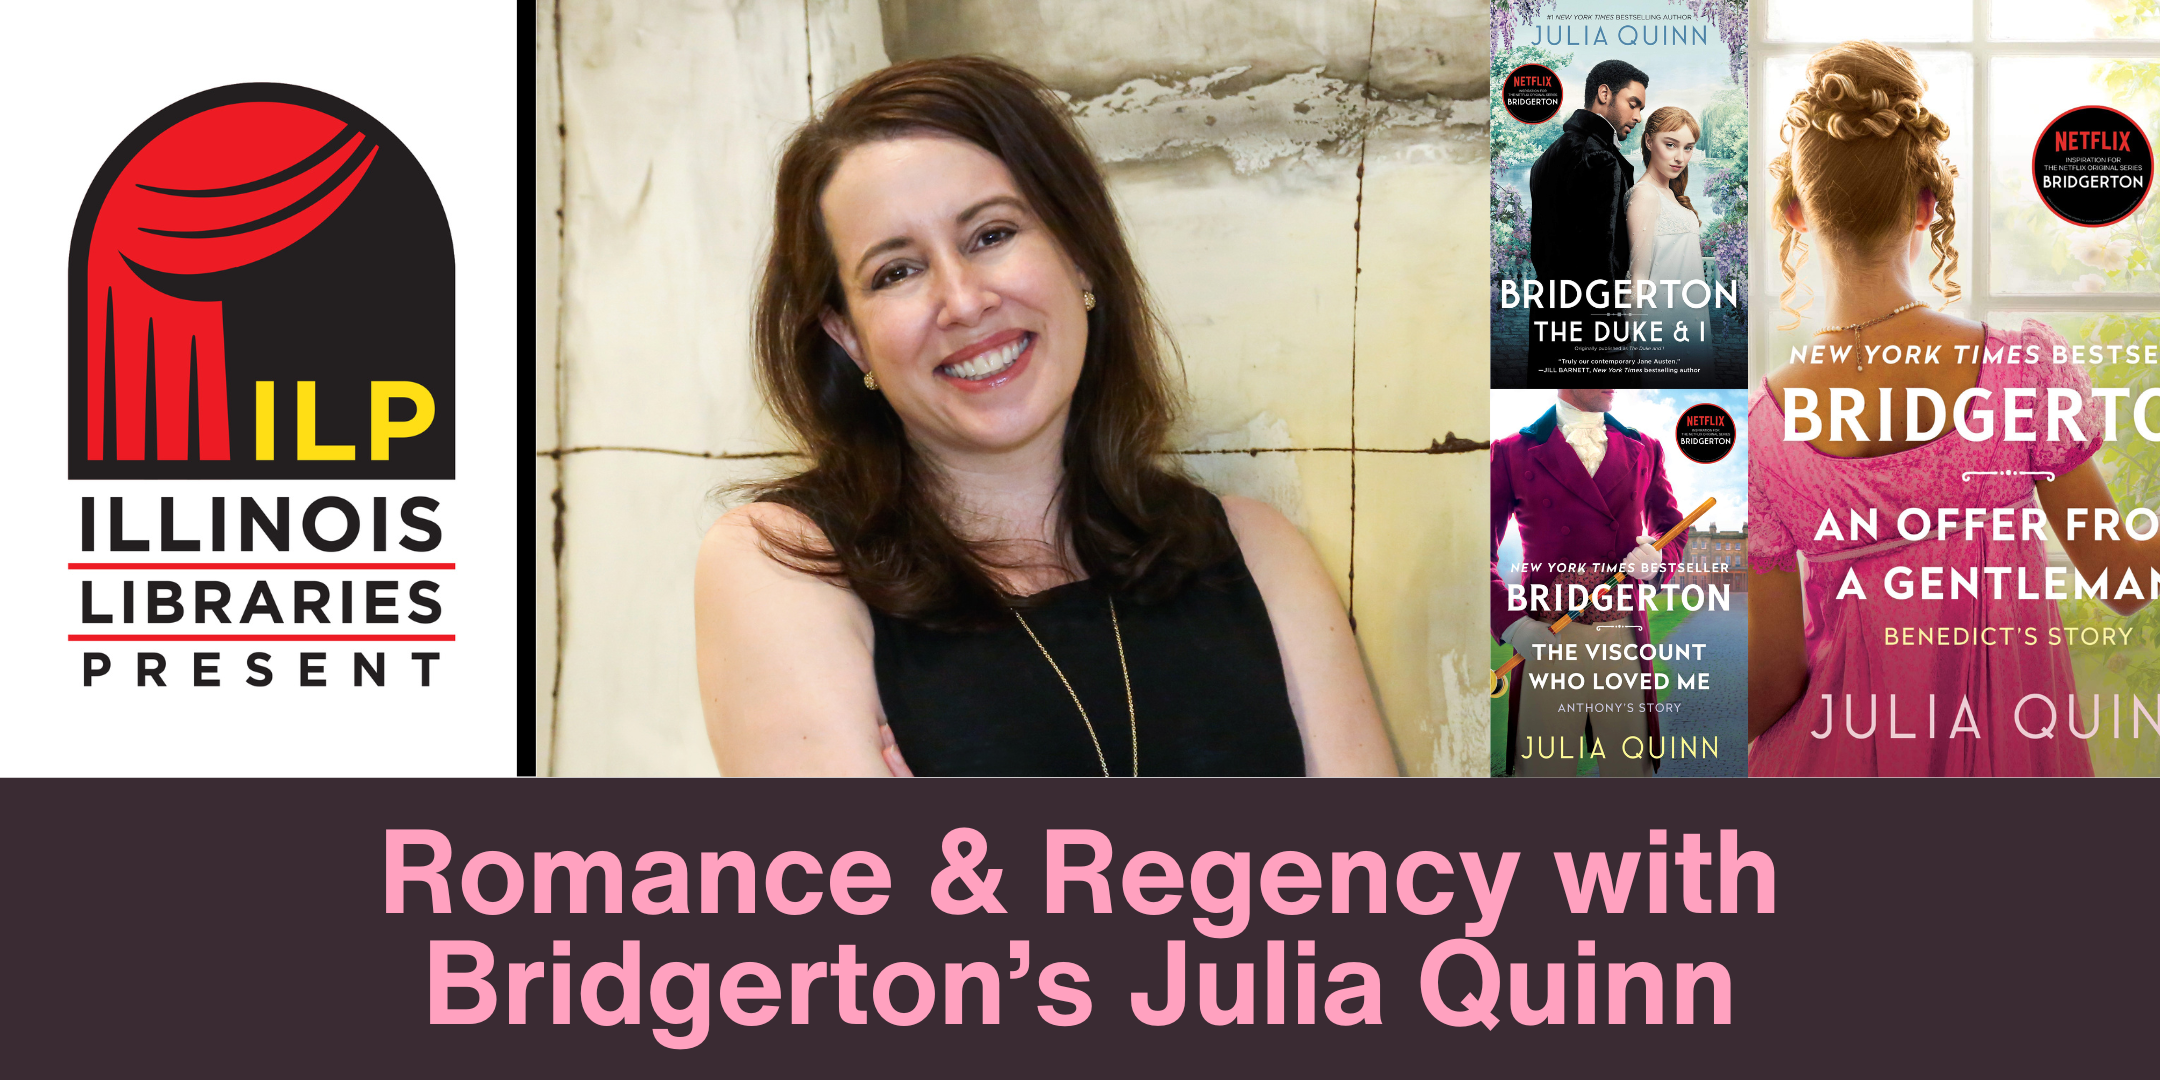 5 Facts About Bestselling Romance Author Julia Quinn